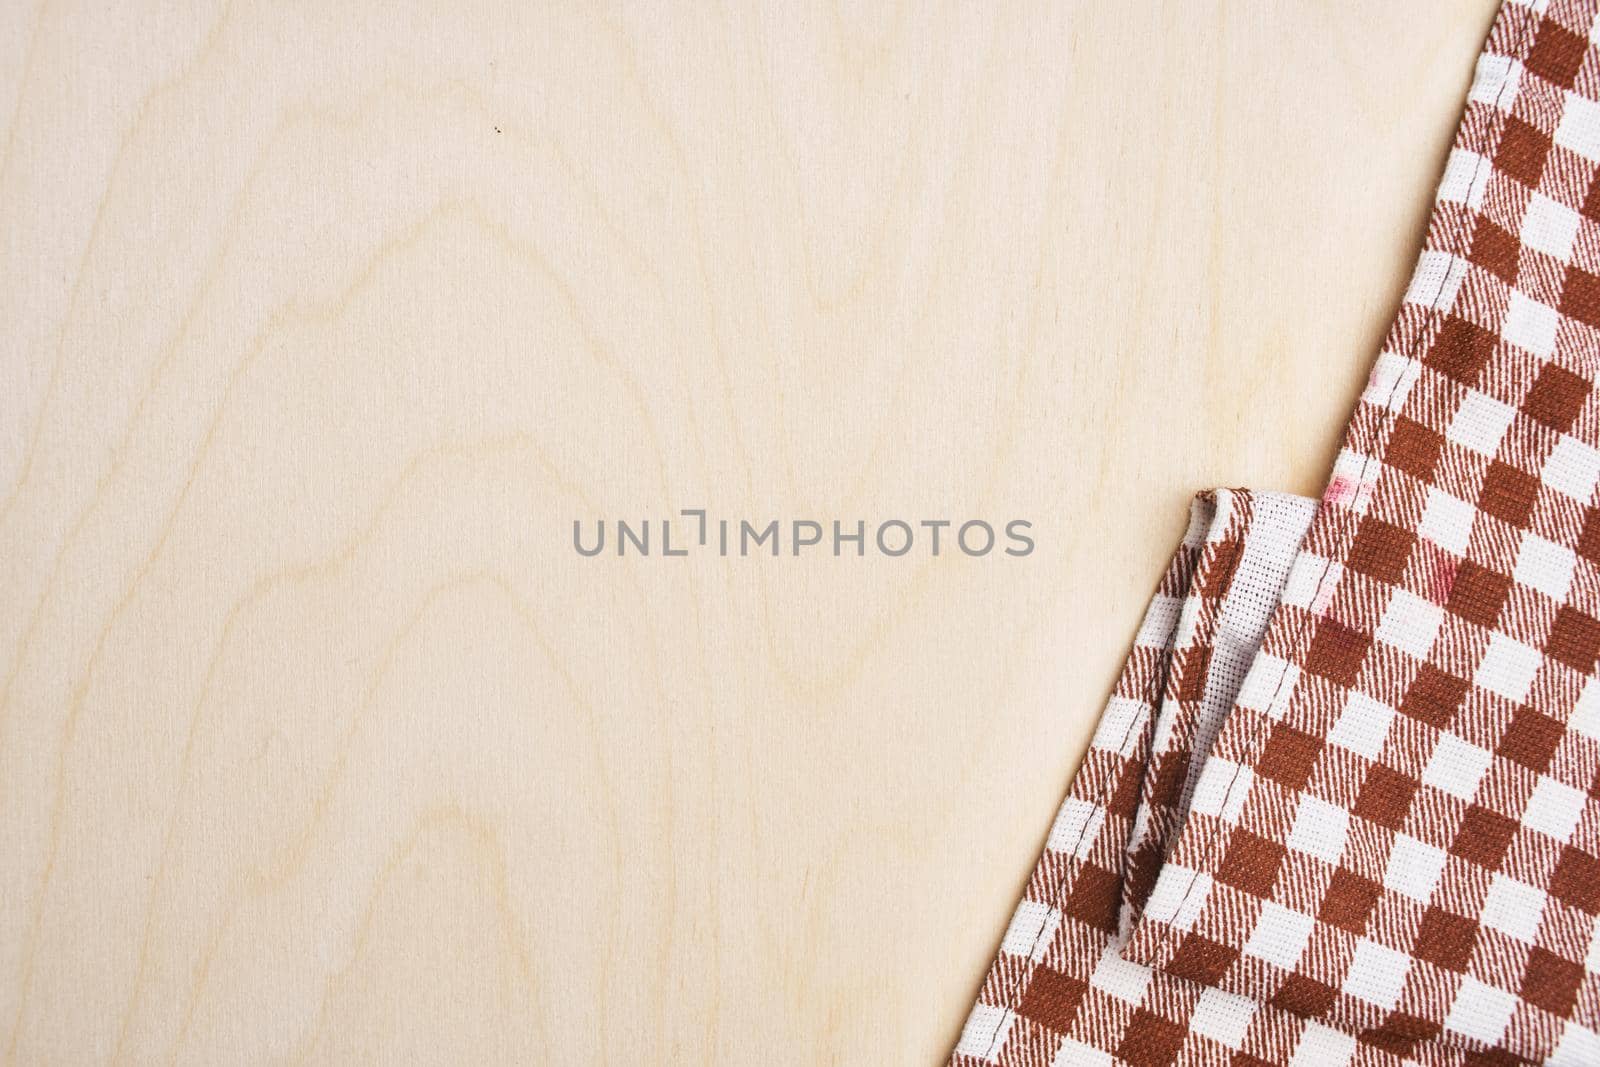 checkered tablecloth light wooden table kitchen interior. High quality photo